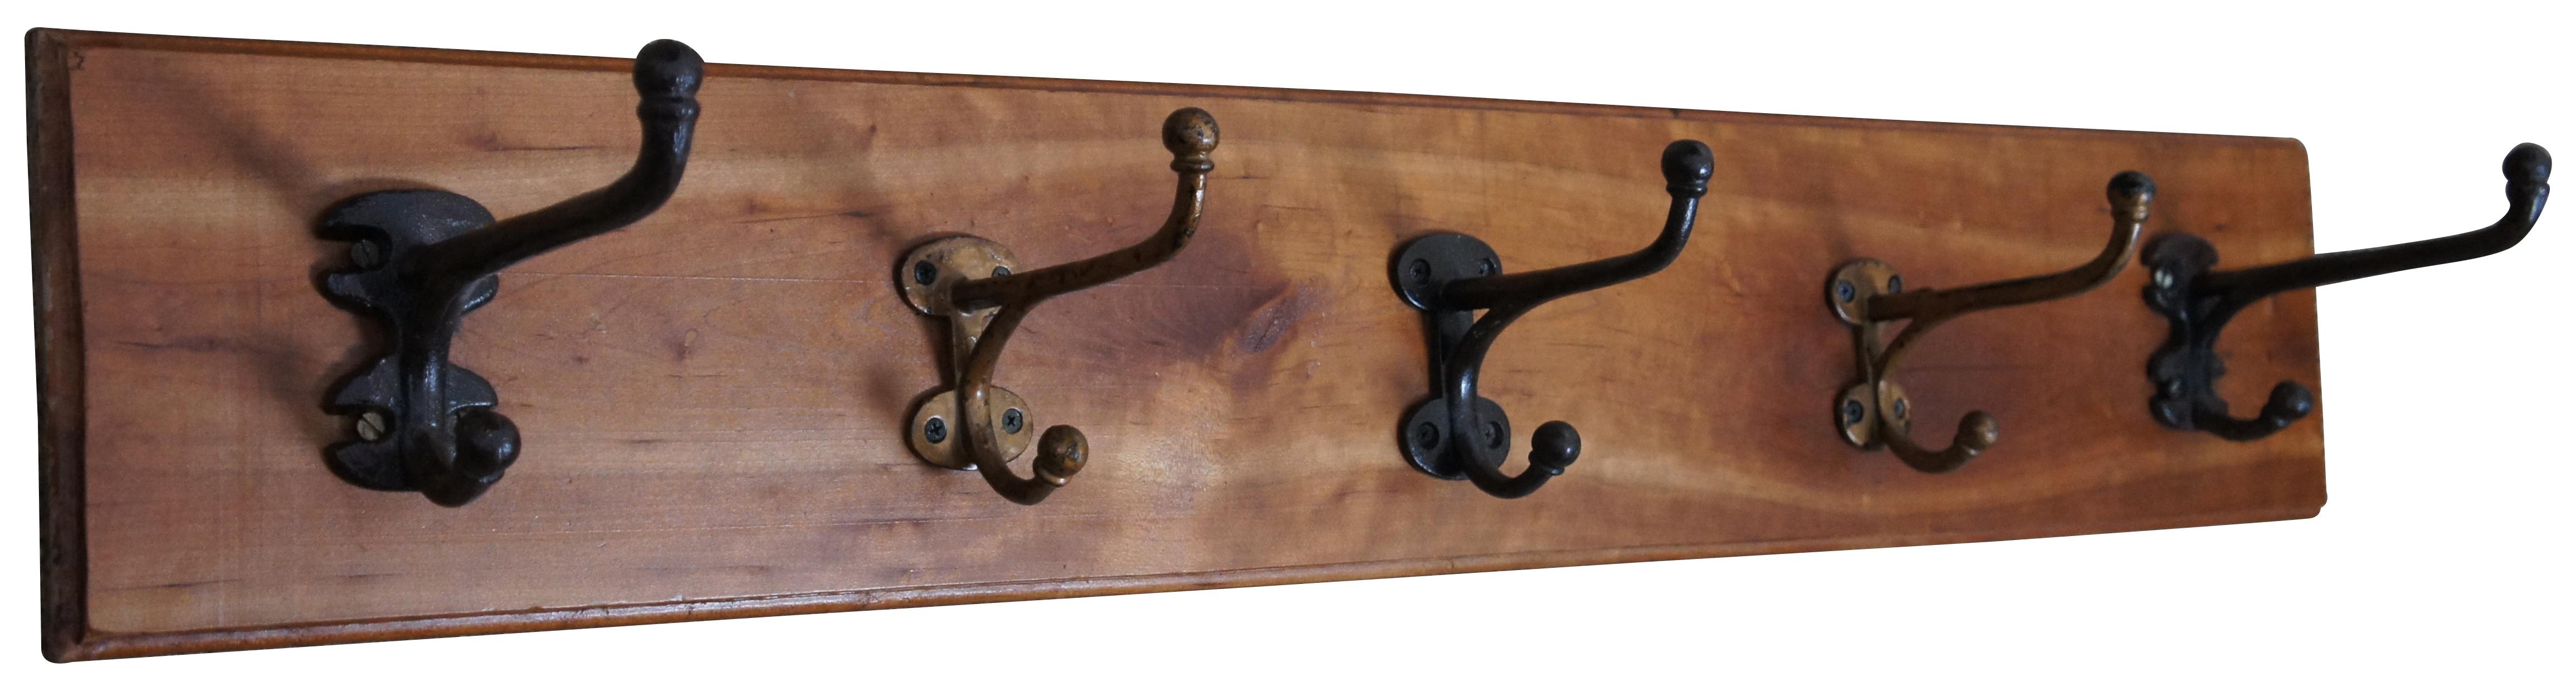 Rustic cherry wood hat / coat / clothing rack / wall tree with five iron hooks. Measure: 45